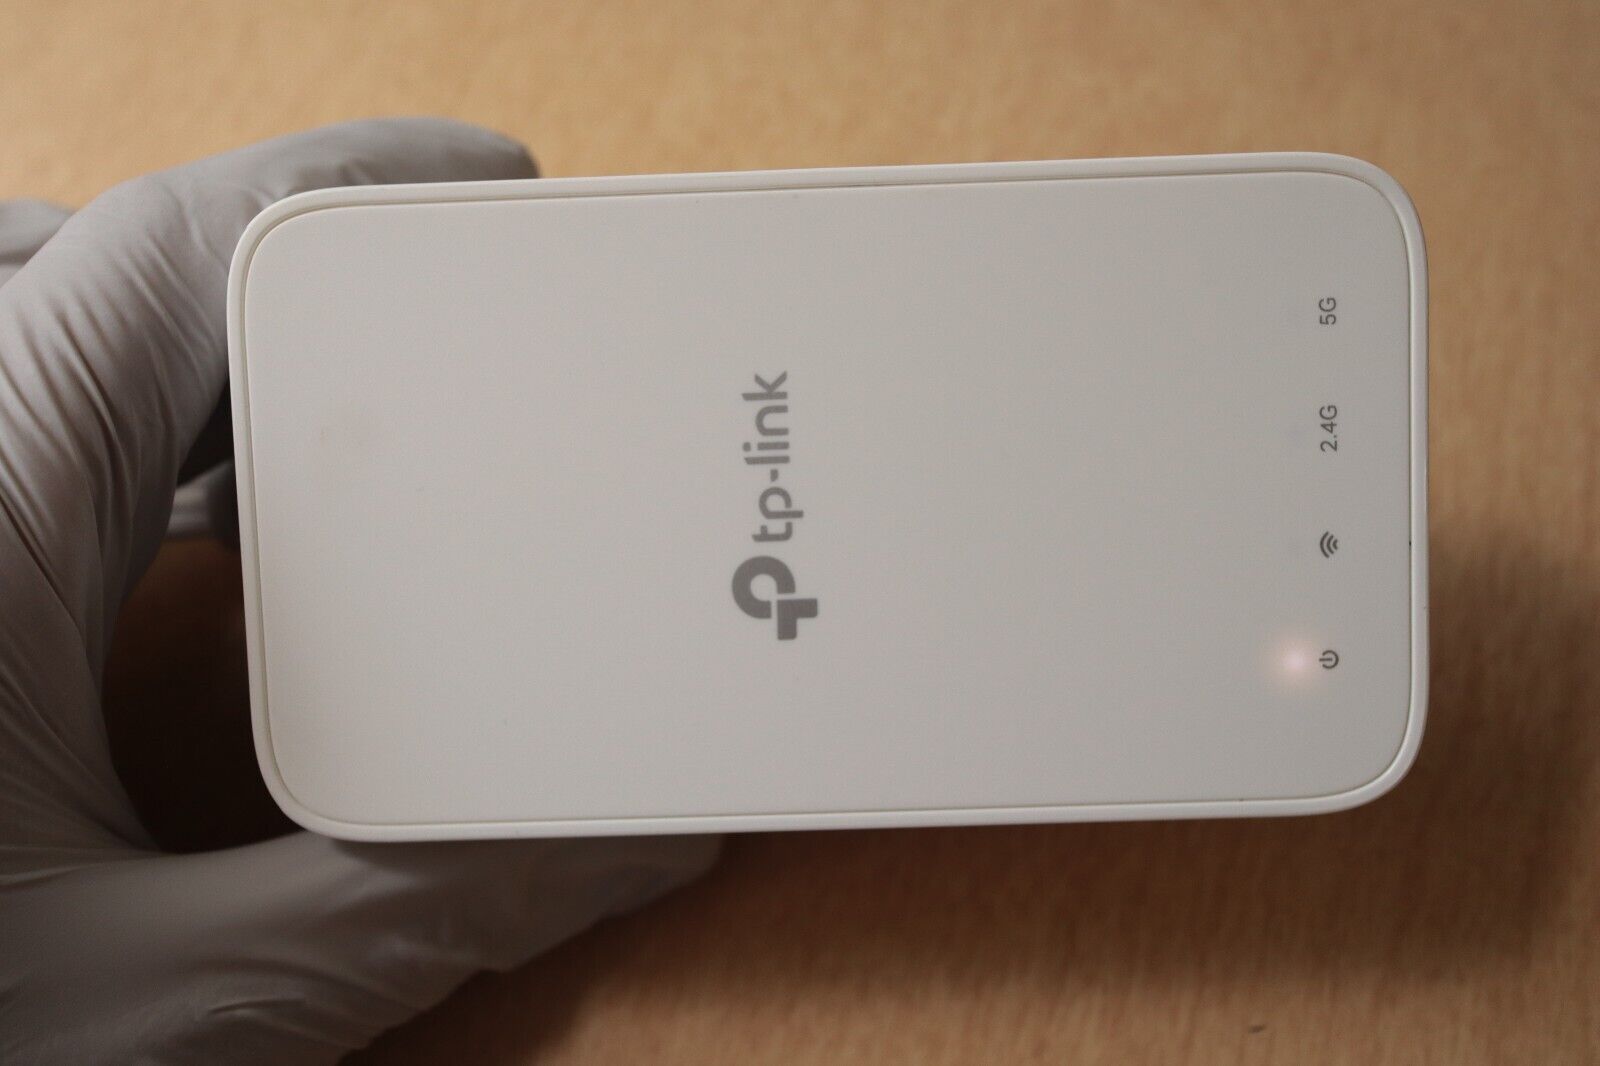 TP-LINK RE300 Mesh Wi-Fi Range Extender AC1200 Dual Band 5/2.4 GHz TESTED